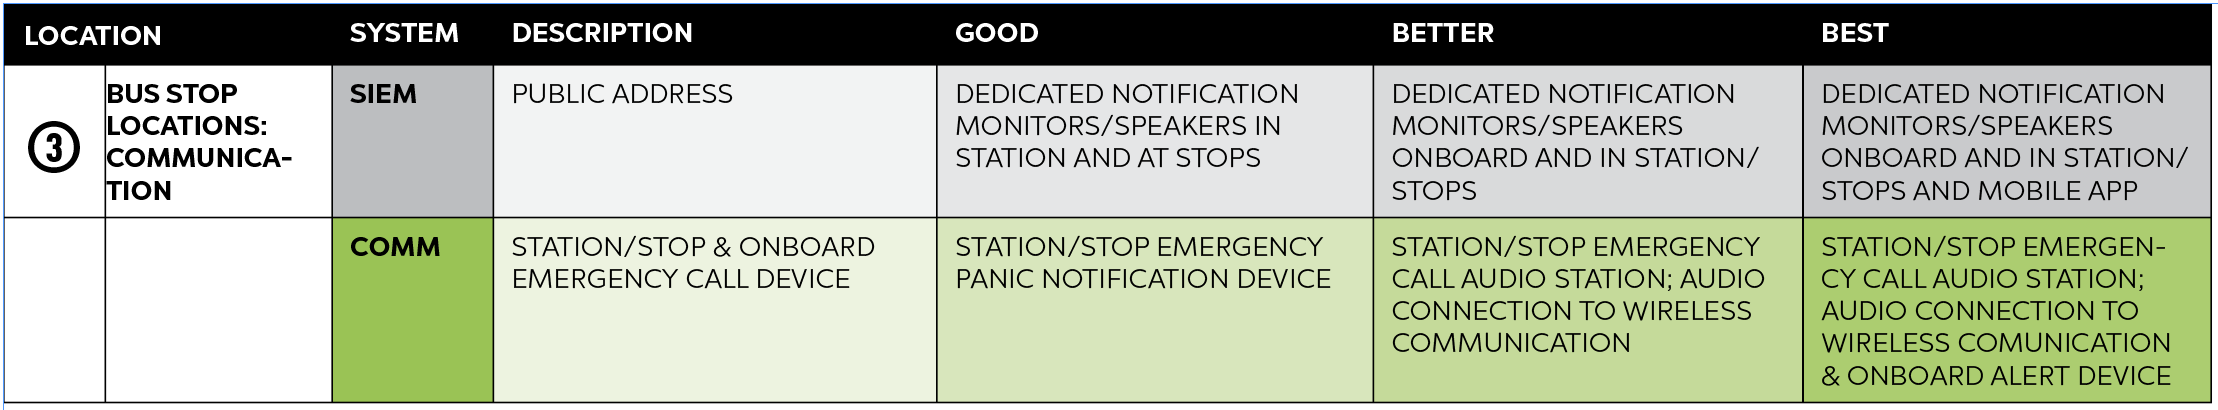 Good, Better and Best system recommendations for bus stop location communications, including specifications for SIEM and communications. To view the guidance with all graphs and charts, please download the full PDF.